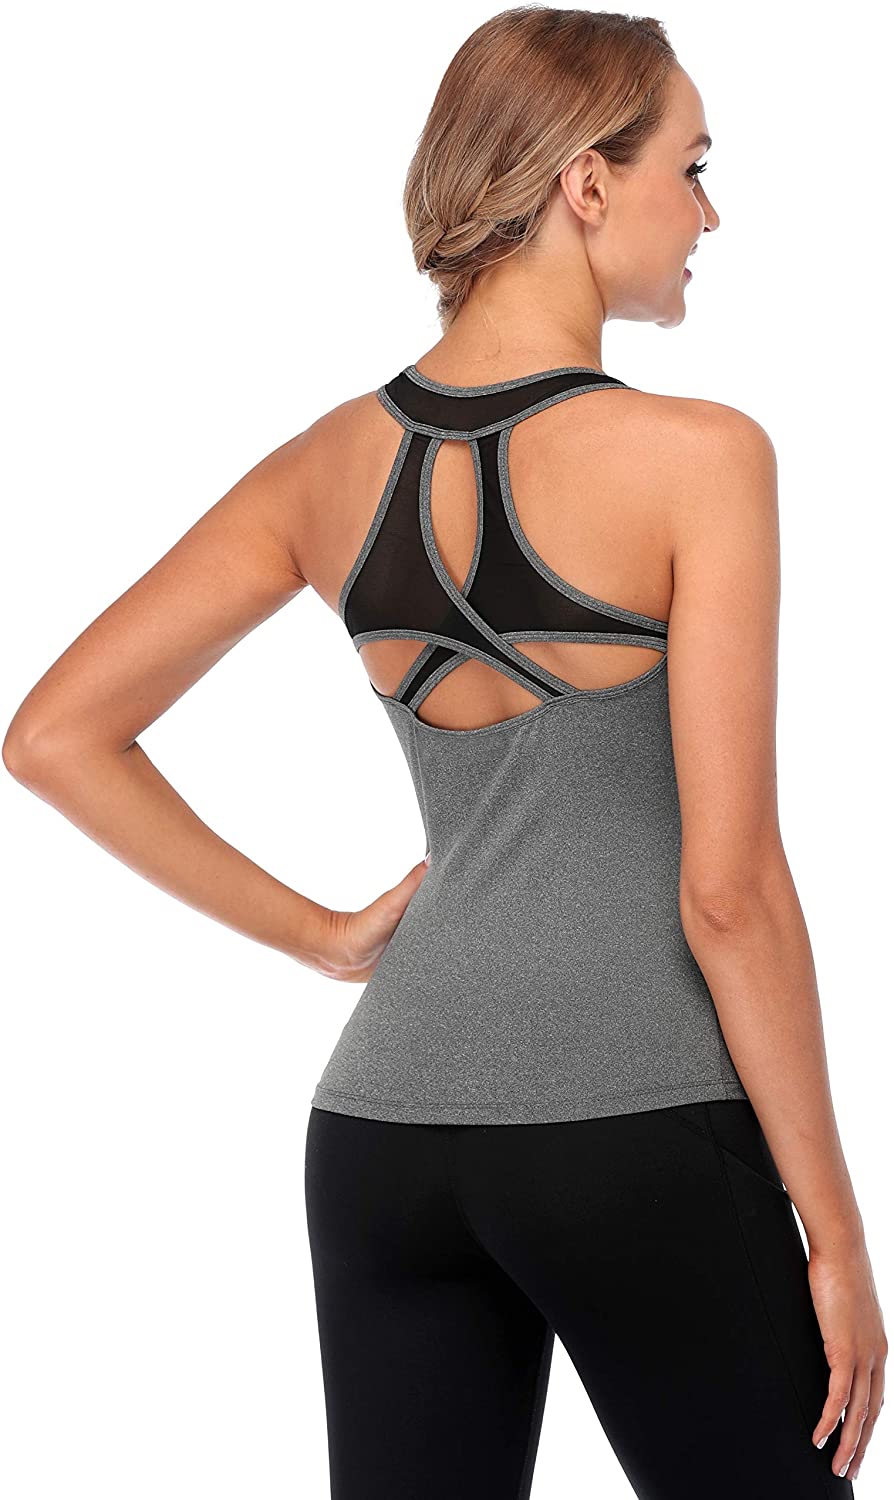 ATTRACO Womens Cute Workout Clothes Mesh Yoga Tops Gym Shirts Running Tank Tops